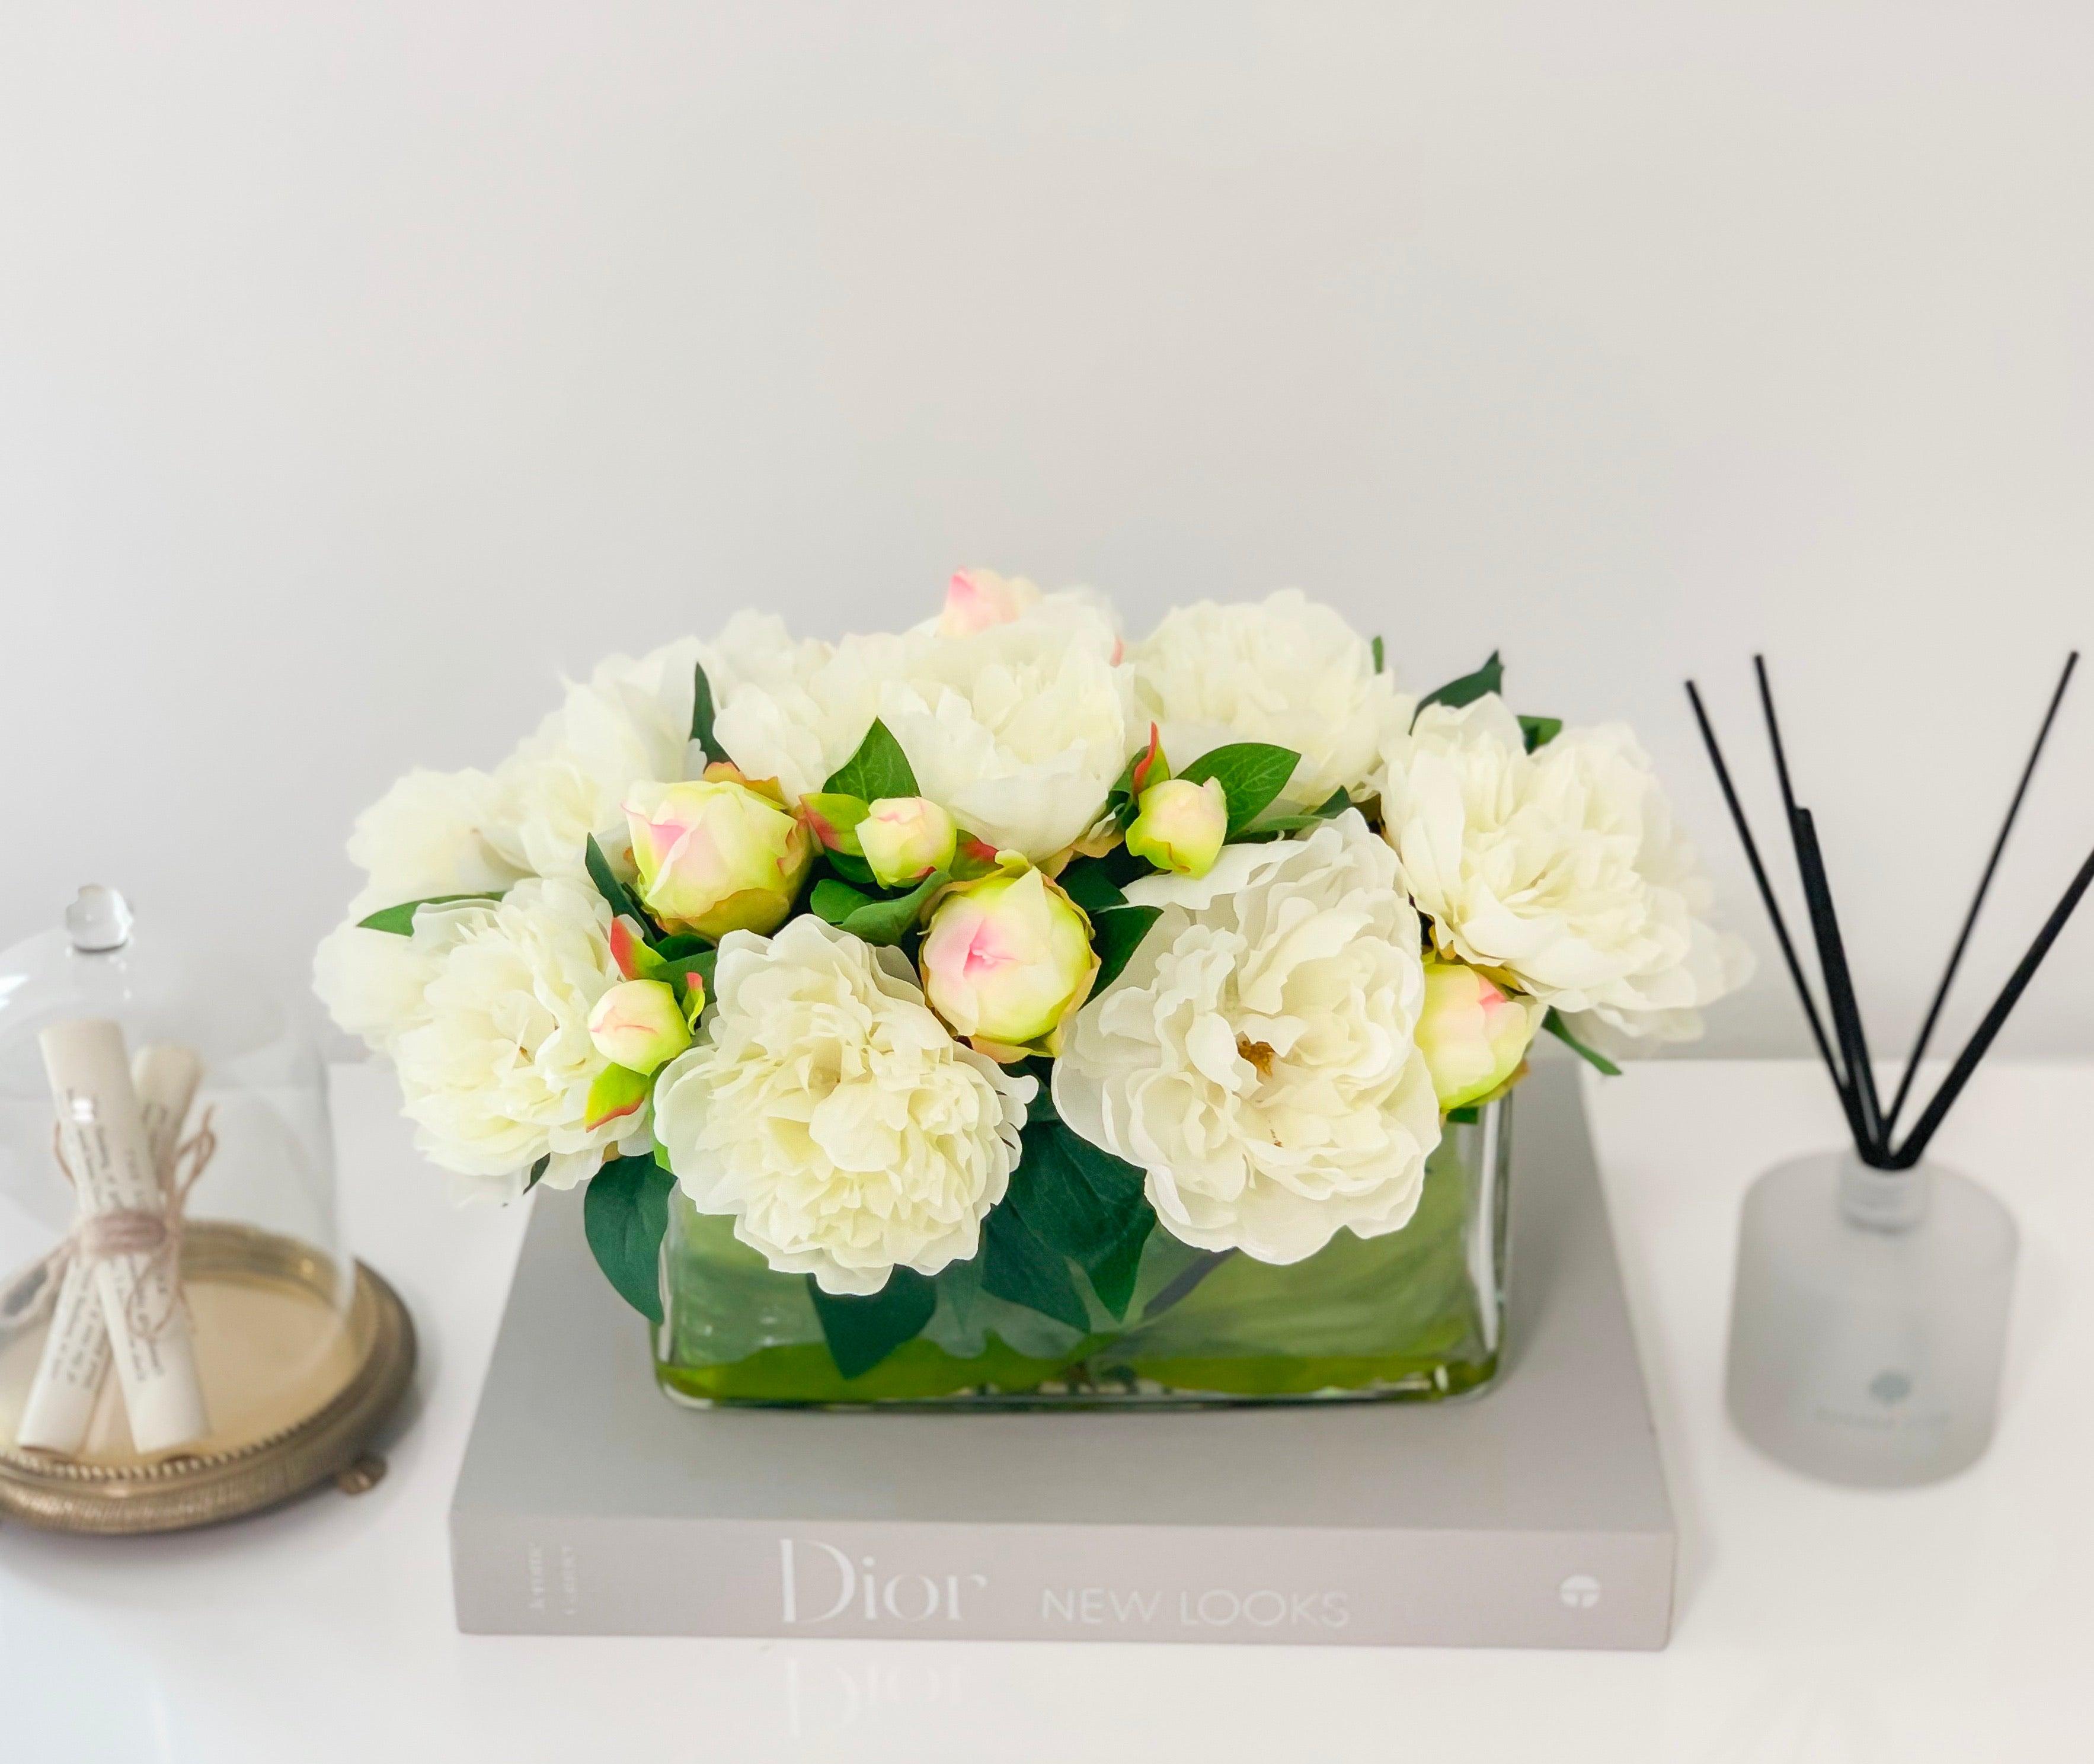 White Peony-Peonies-Finest Silk Flower Arrangement-Peony Arrangement-White Luxury Silk Peony-Artificial Arrangement-Home Decor-Faux Flowers - Flovery